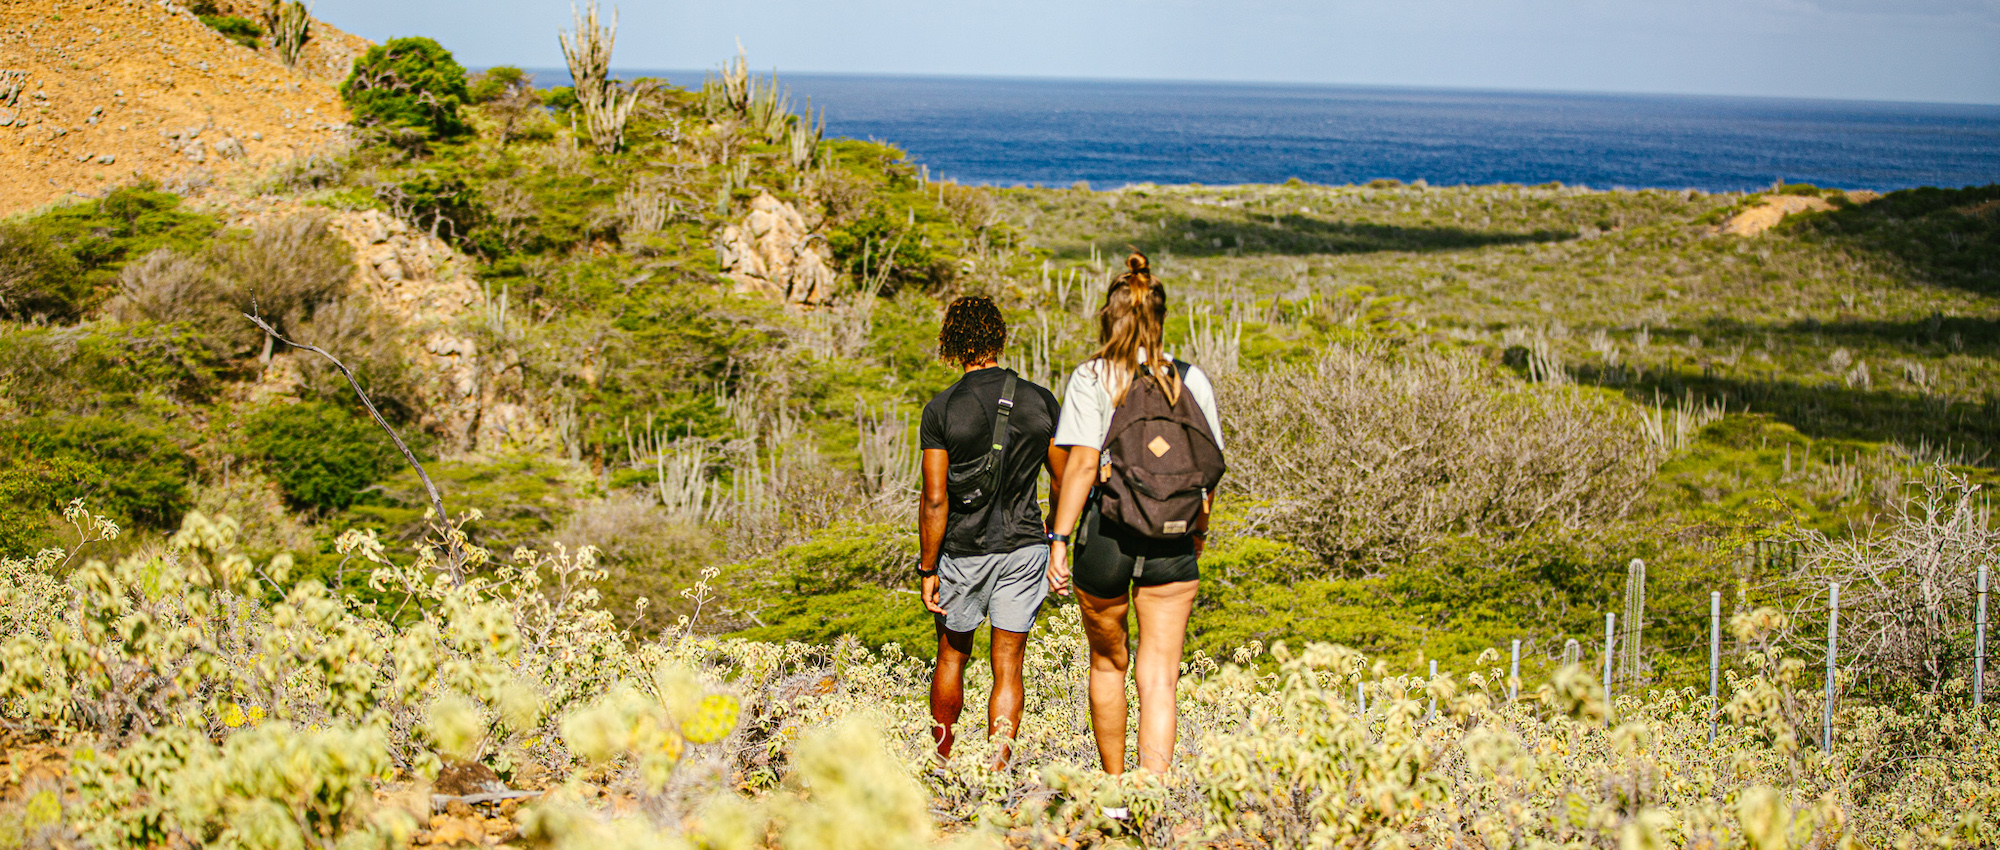 Male and woman hiking